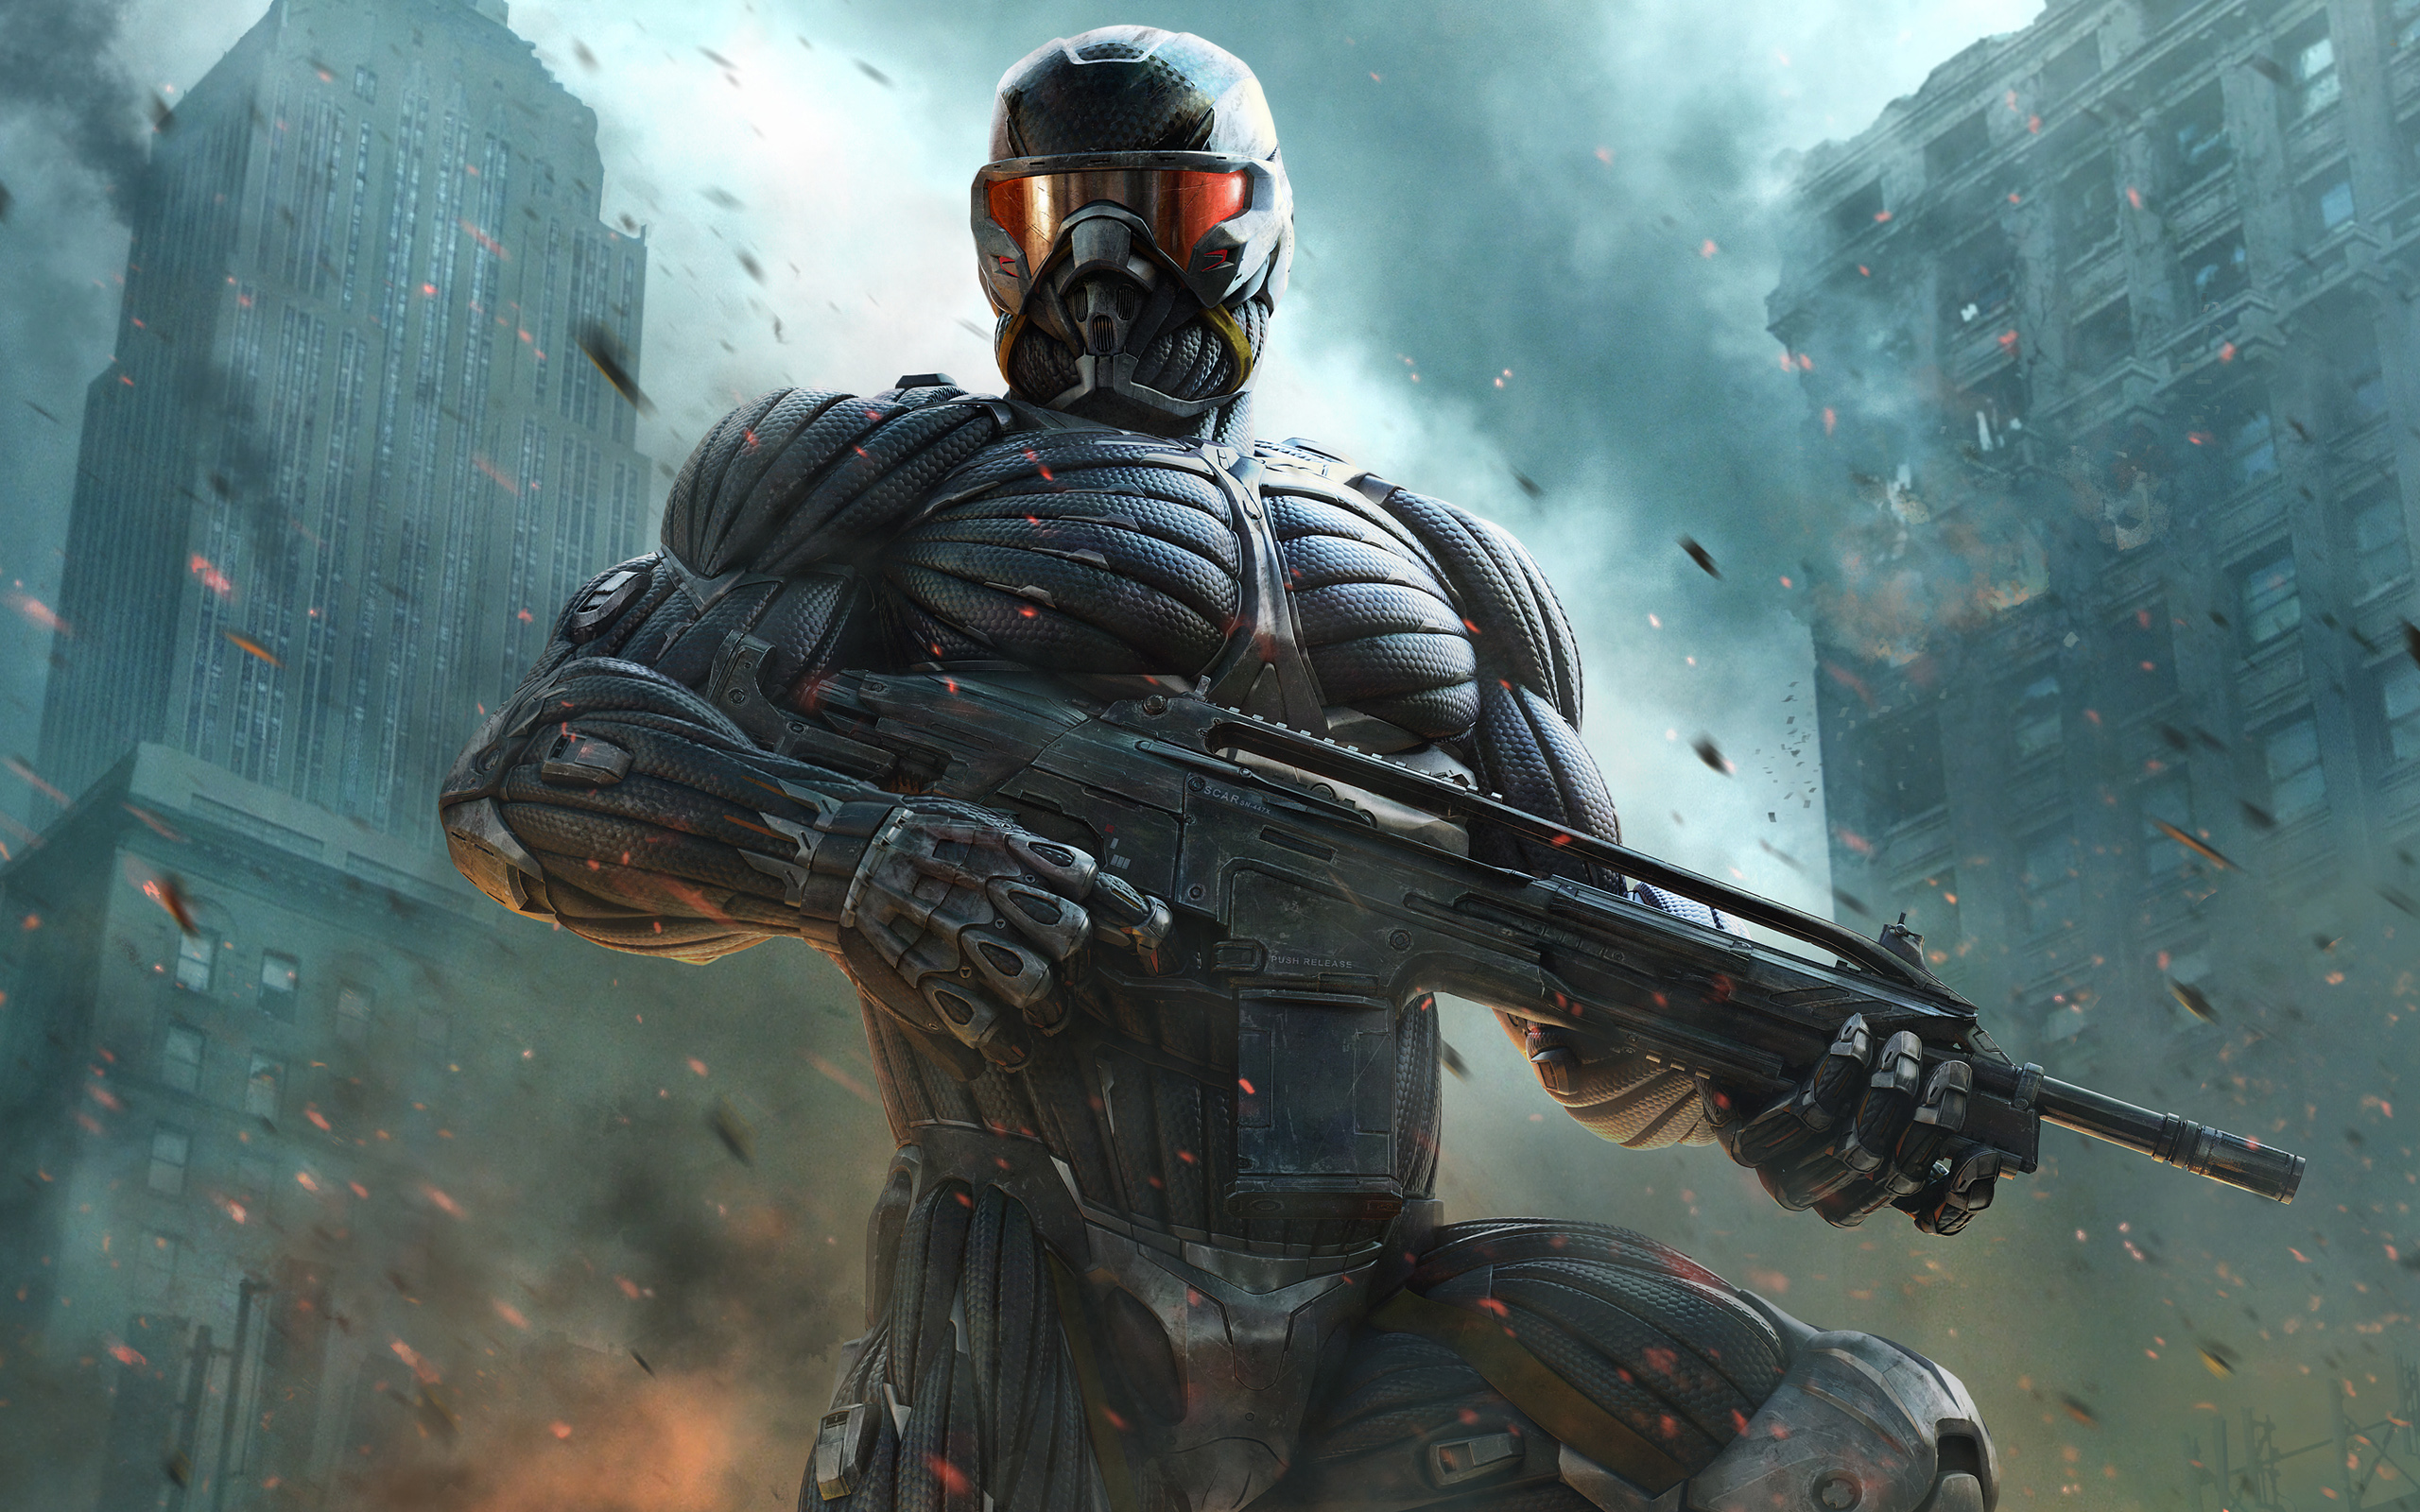 Crysis 2 FPS Game Wallpapers | Wallpapers HD2560 x 1600